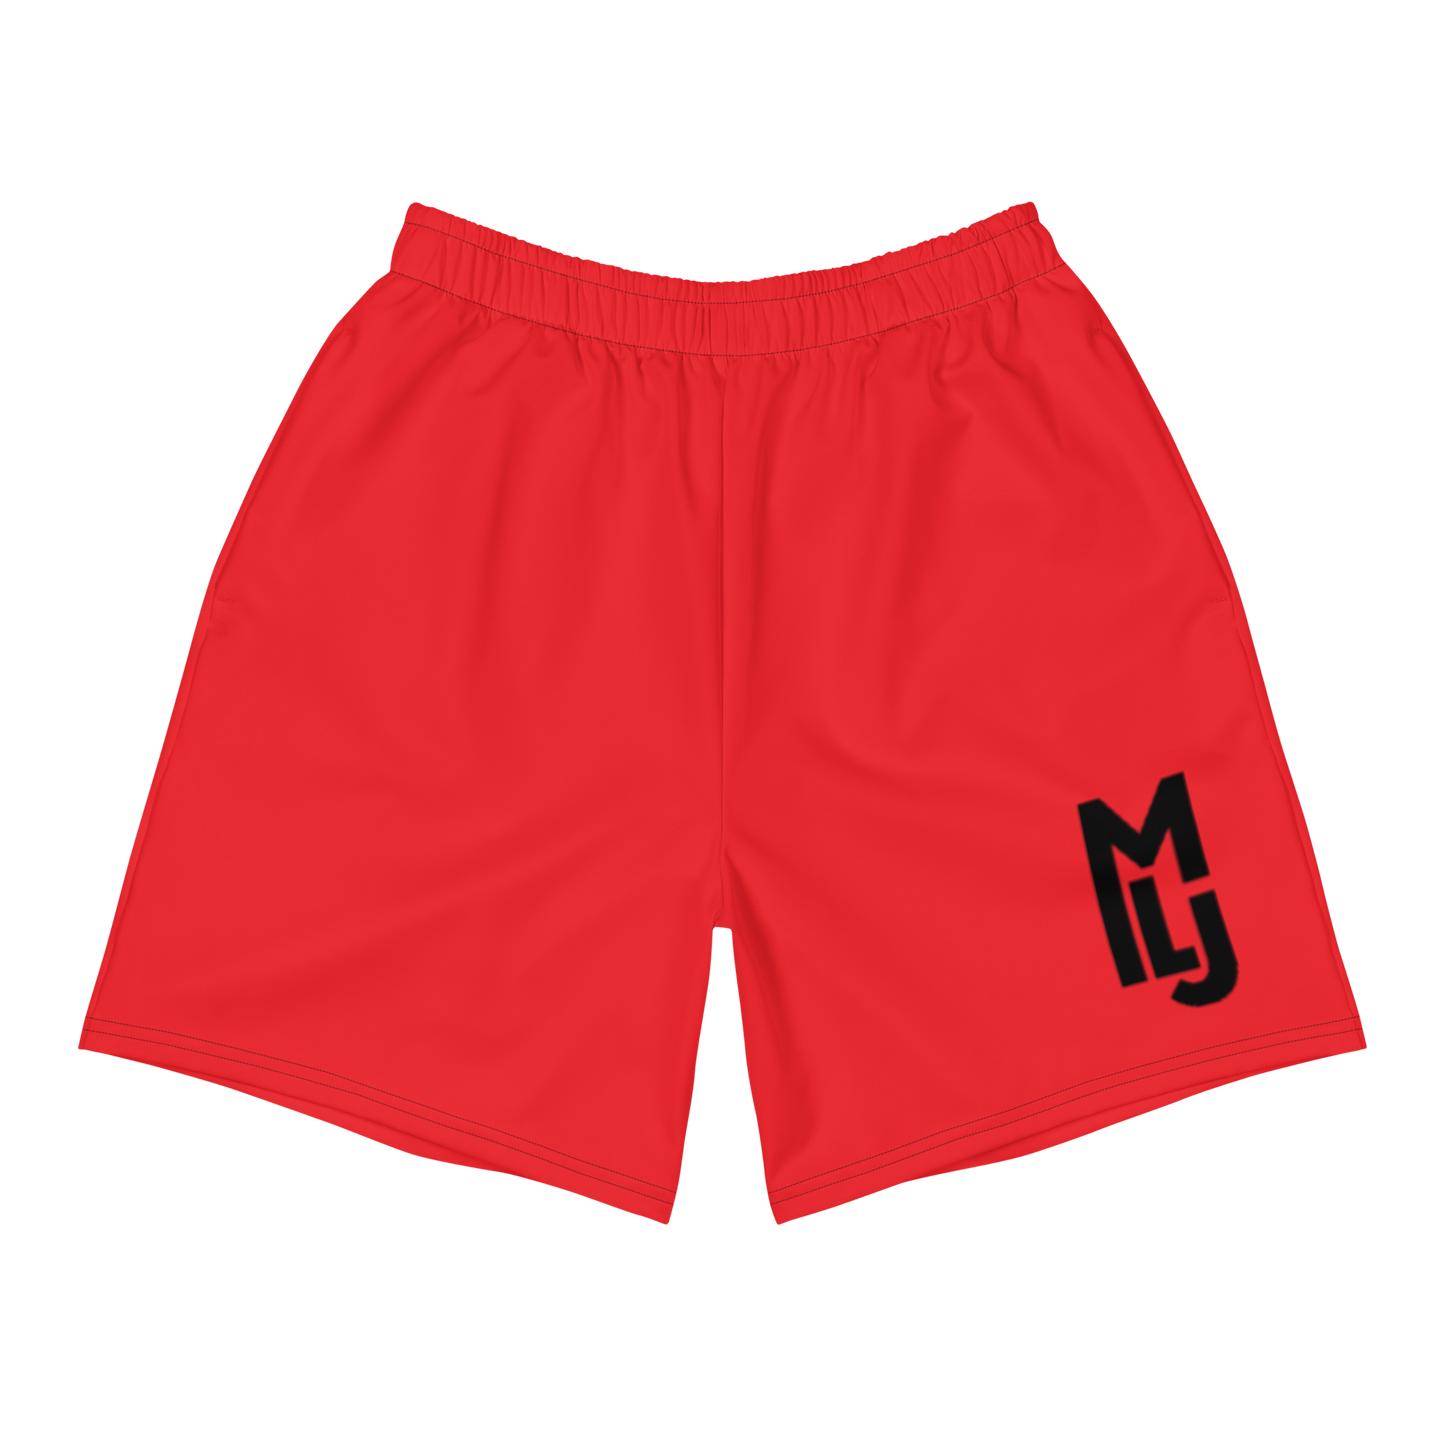 MARK LEE RED ATHLETIC SHORTS